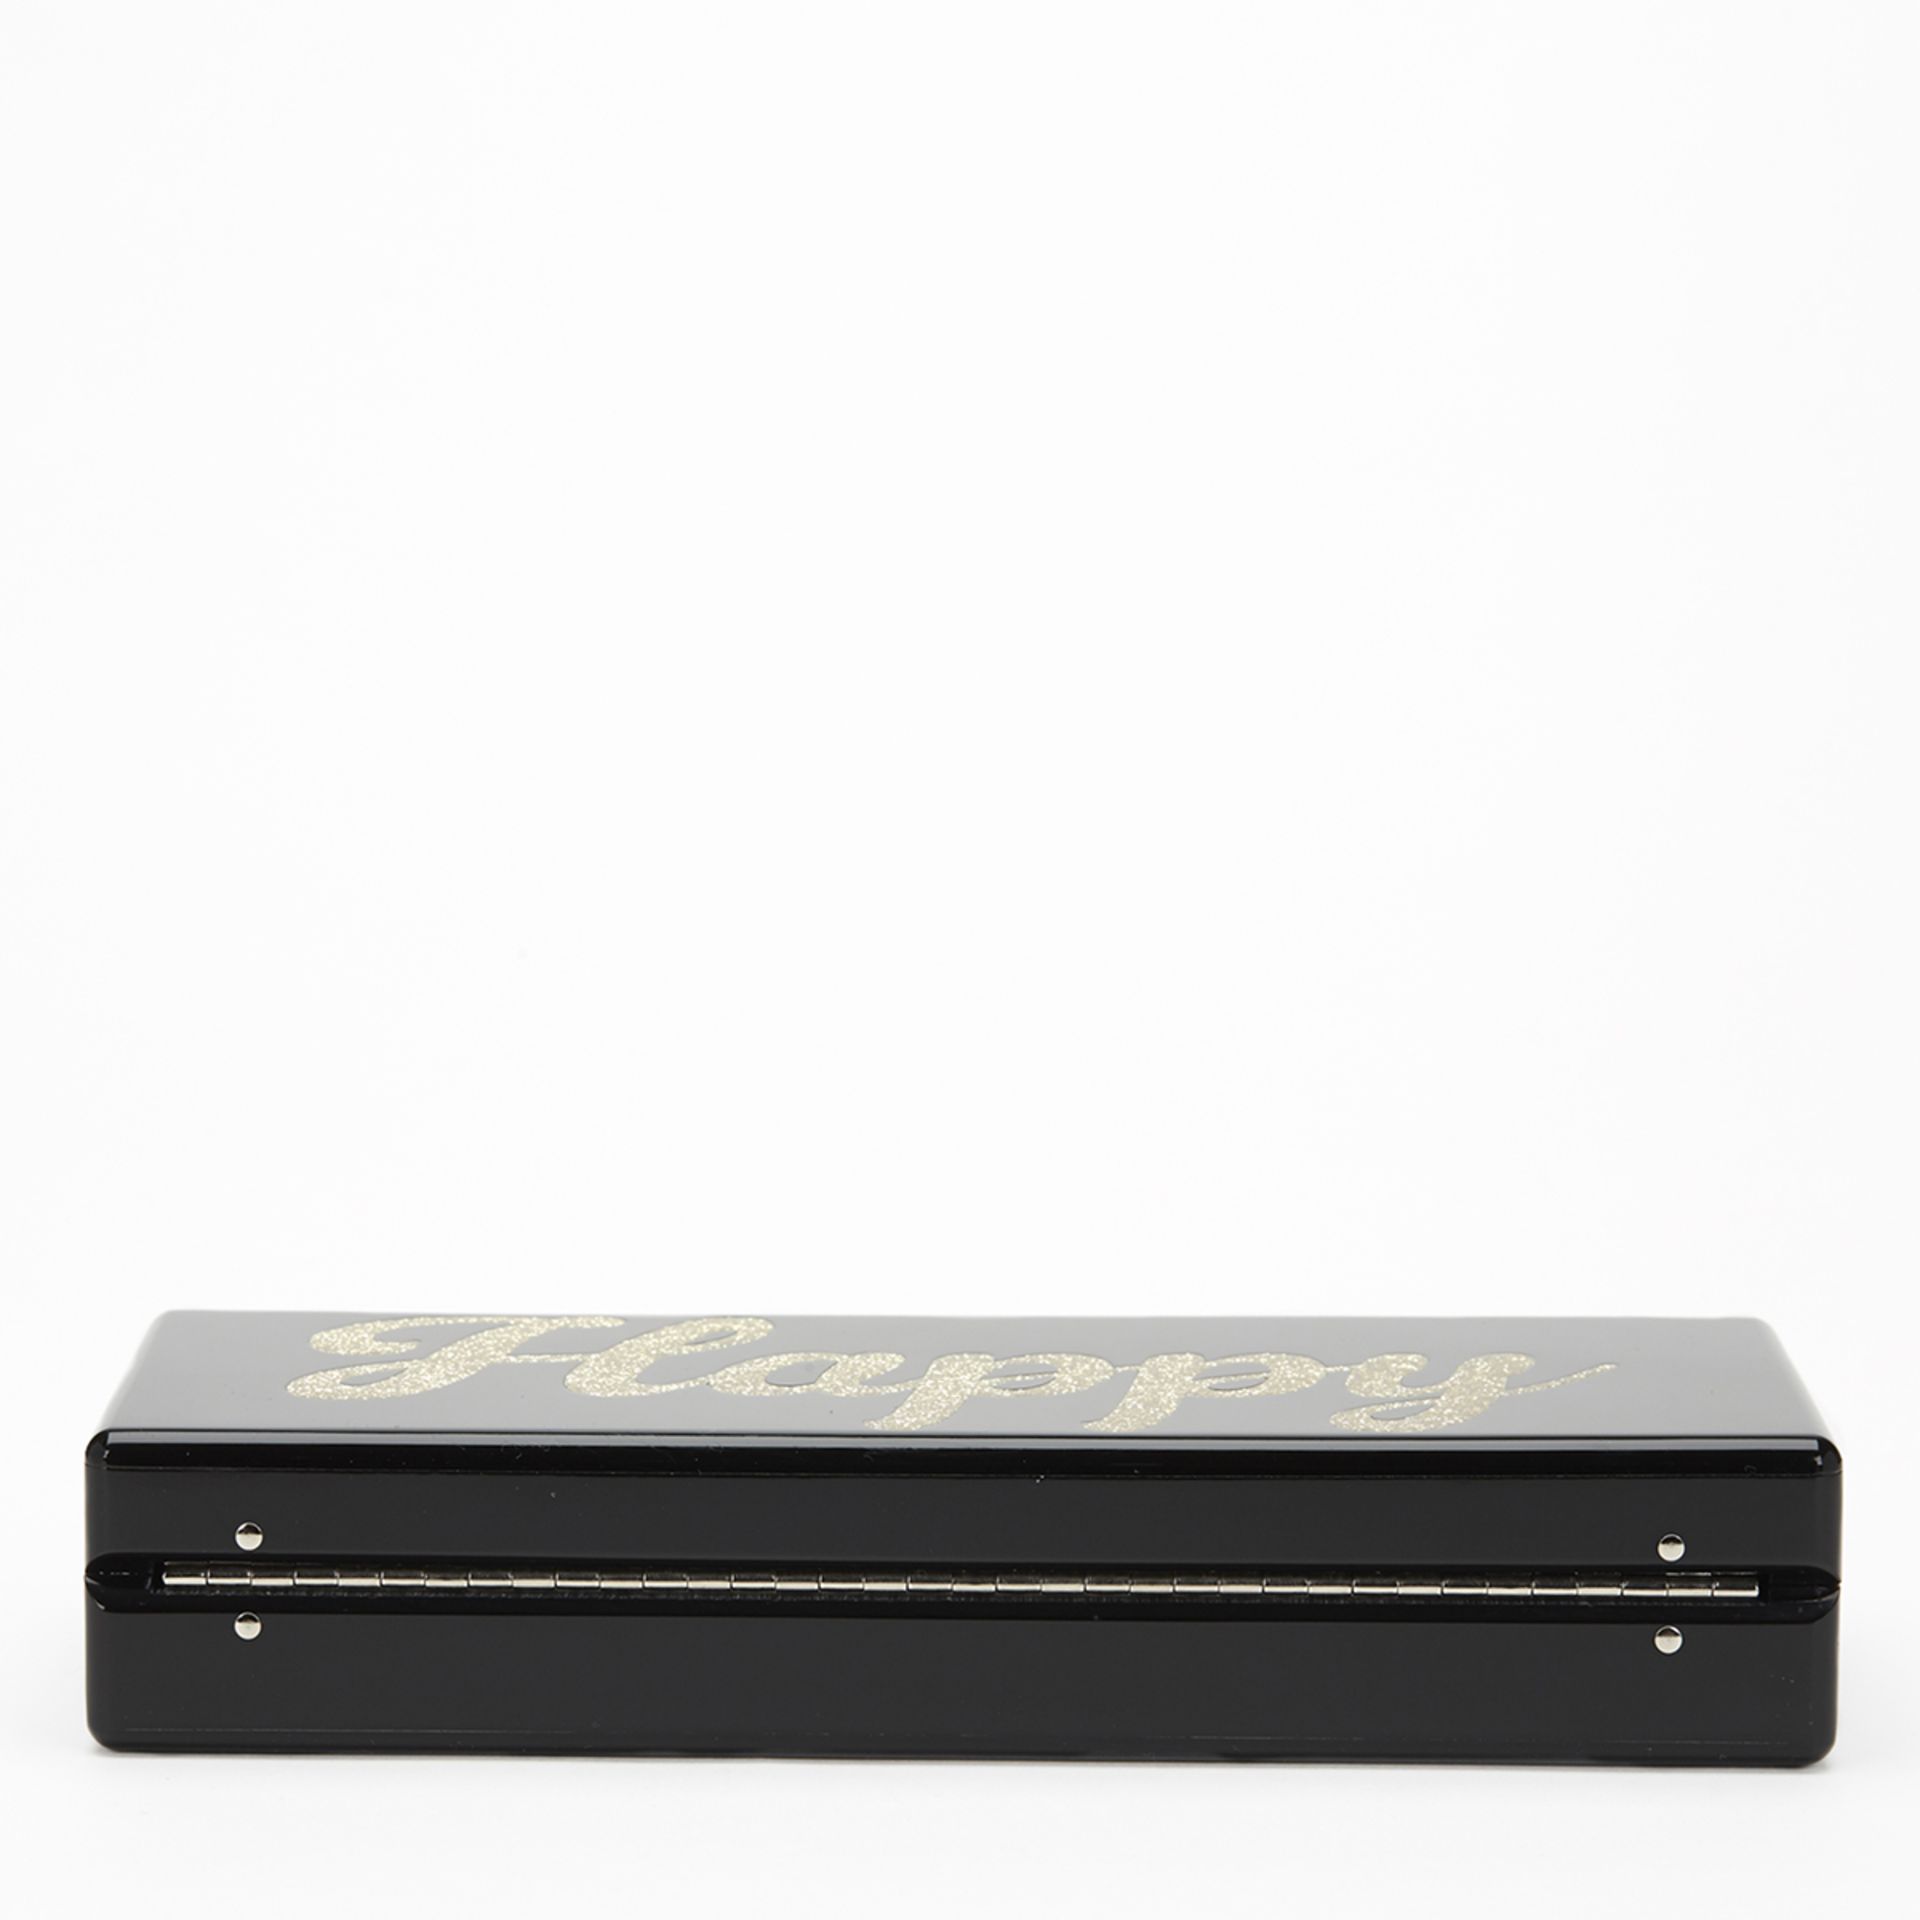 Edie Parker Black Glittered Acrylic Happy Box Clutch - Image 5 of 9